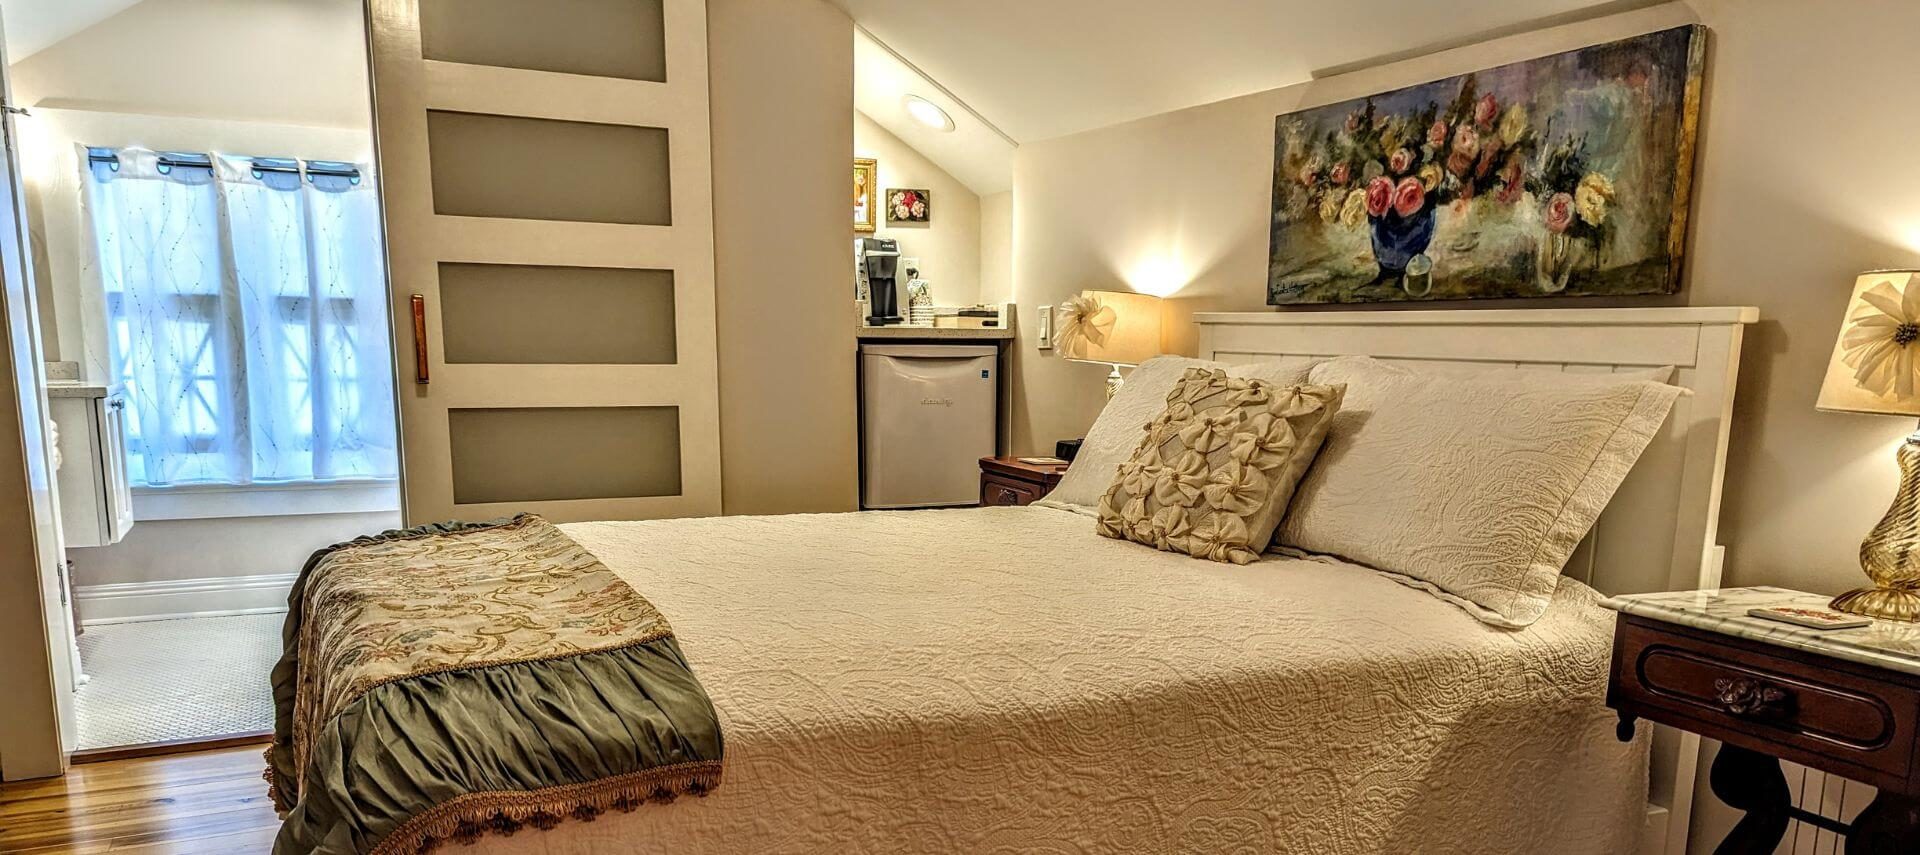 A bedroom with wood floors, cream and green walls, a bed with white bedding and tapestry throw, a framed photo above the bed, a mini fridge and coffee center, and a window letting in sunlight